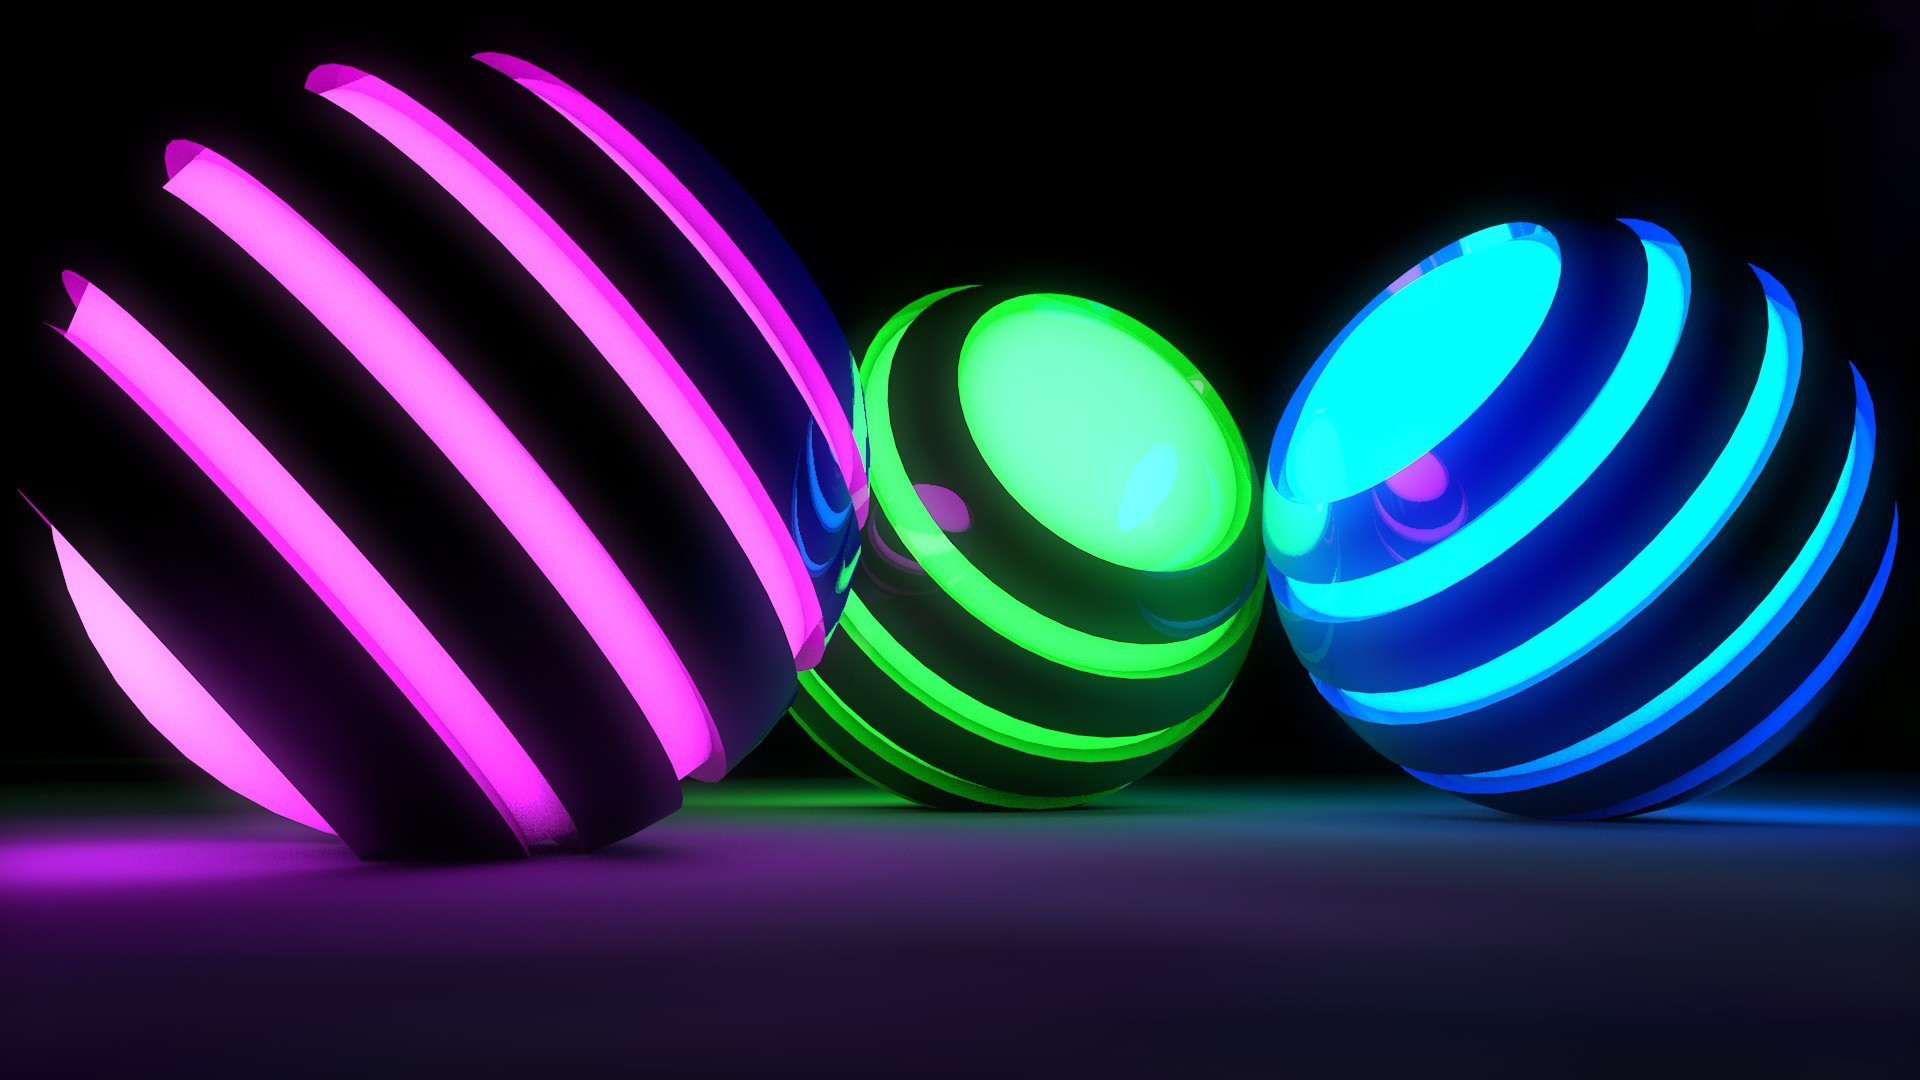 1920x1080 Neon Wallpapers : Find best latest Neon Wallpapers in HD for your PC  desktop background & Â· Neon WallpaperDesktop BackgroundsMobile Phones FractalsPc